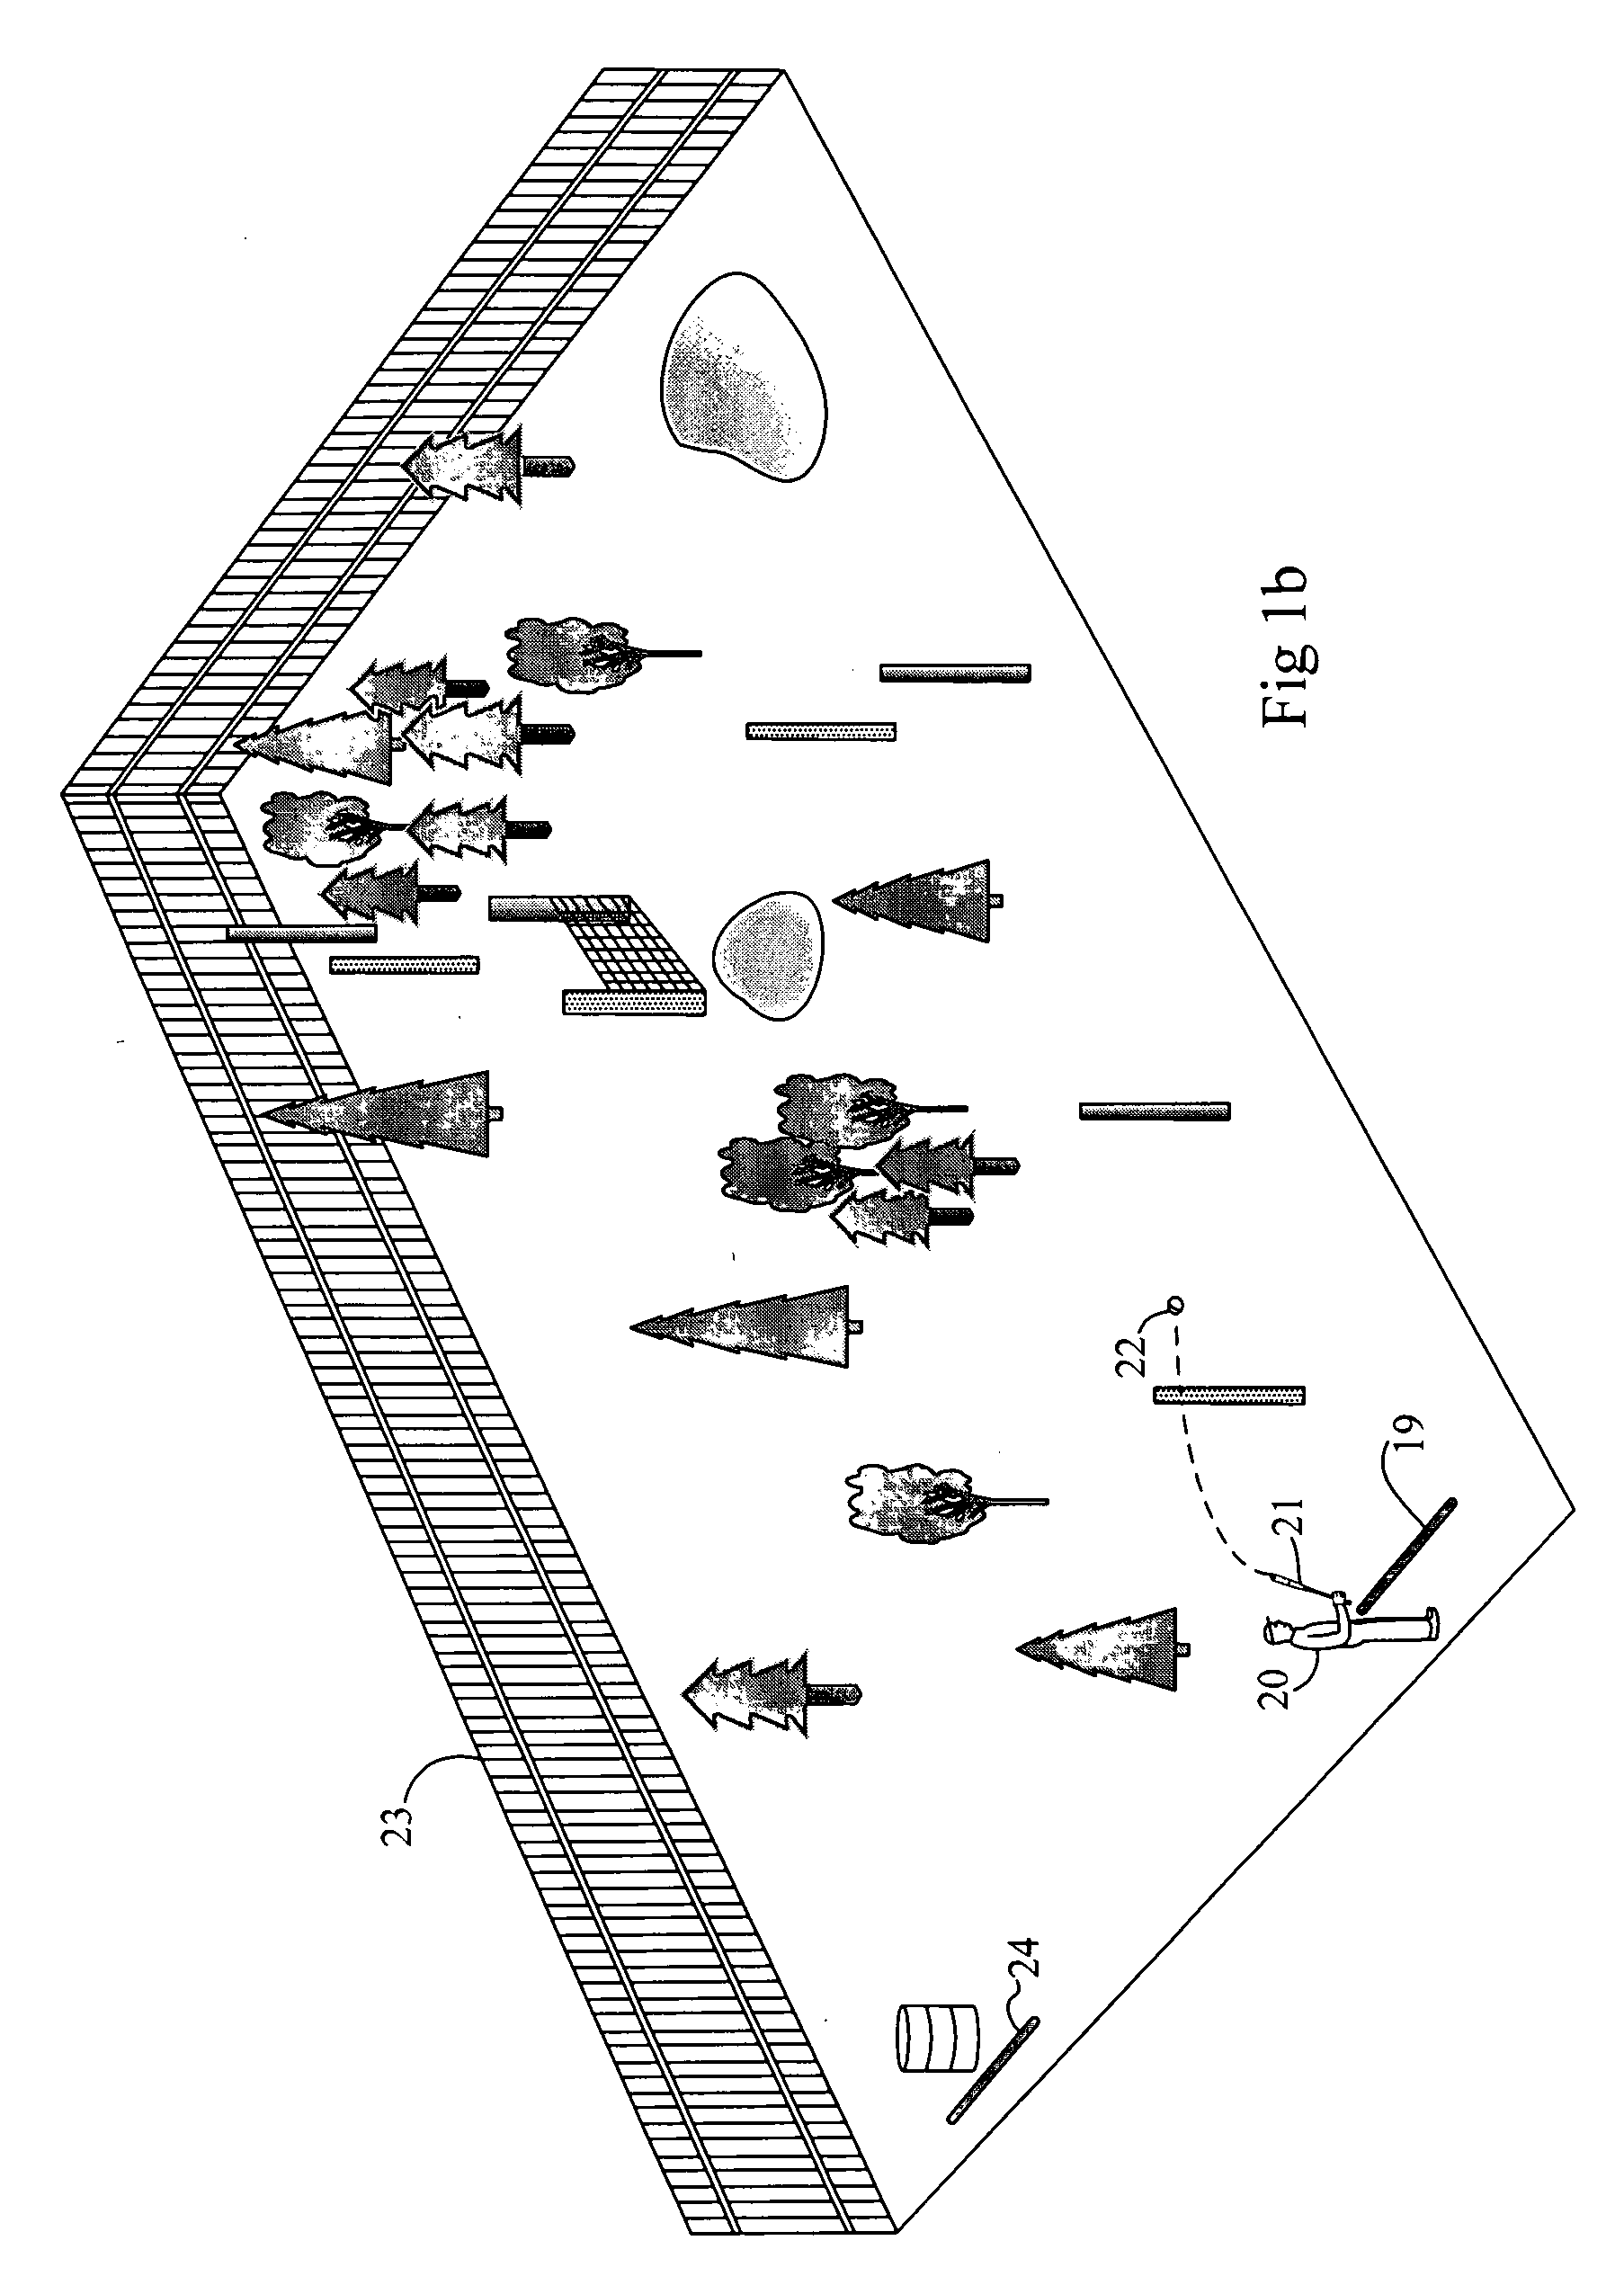 Game system and method for hitting a ball through a playing field